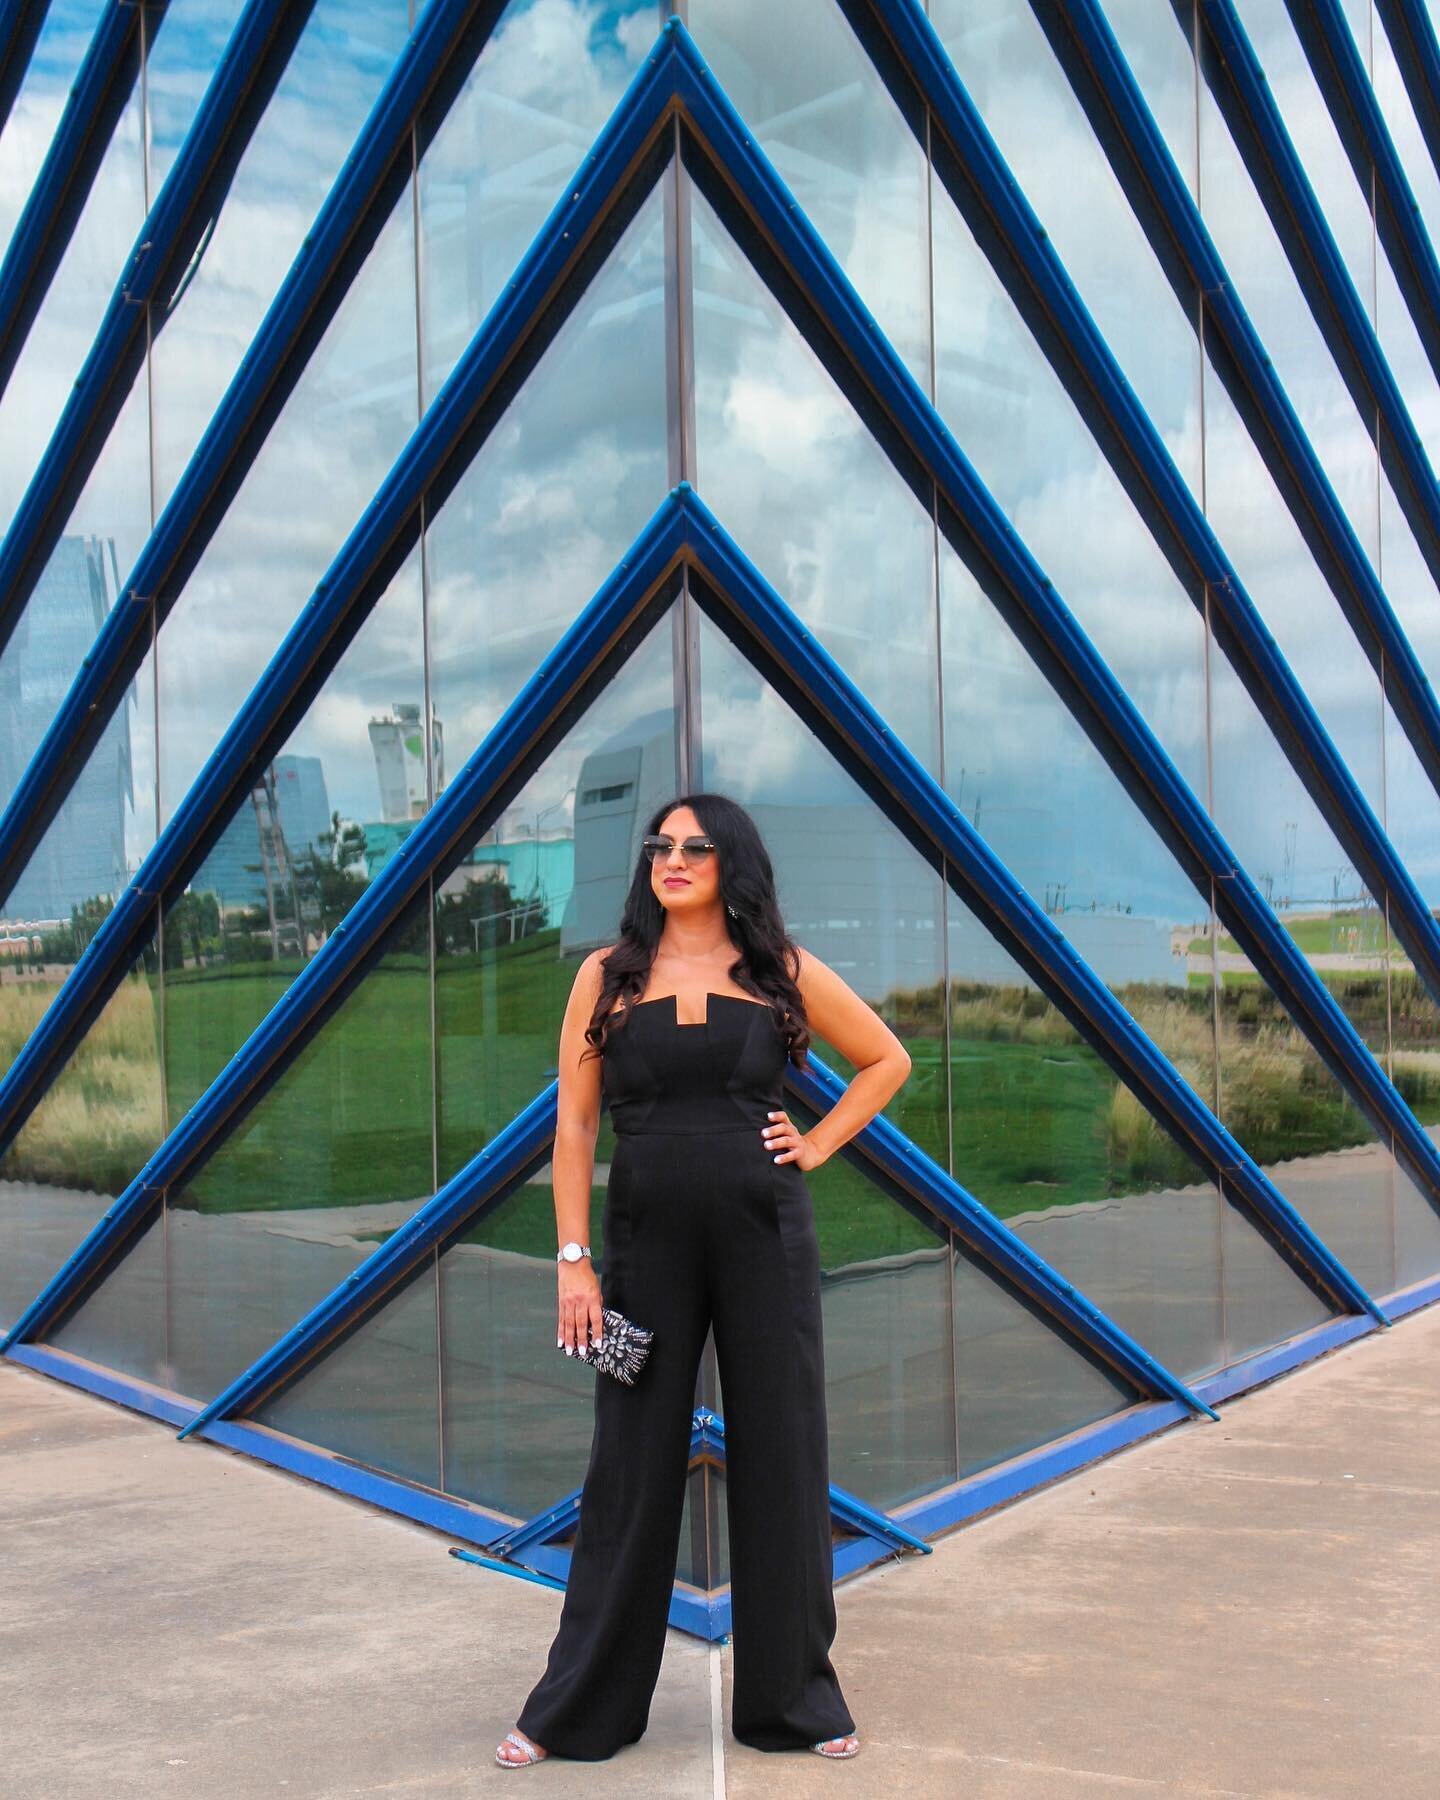 &ldquo;Just took a DNA test turns out I&rsquo;m 💯percent that b*t$!.&rdquo; Swimmin in Lizzo self love this Sunday.🖤 #ootd #ootdfashion #fashiondiaries #stylegoals 
#whatimwearing #wiwtoday #shopmylook #blackhalojumpsuit #wearmycloset #outfitinspo 